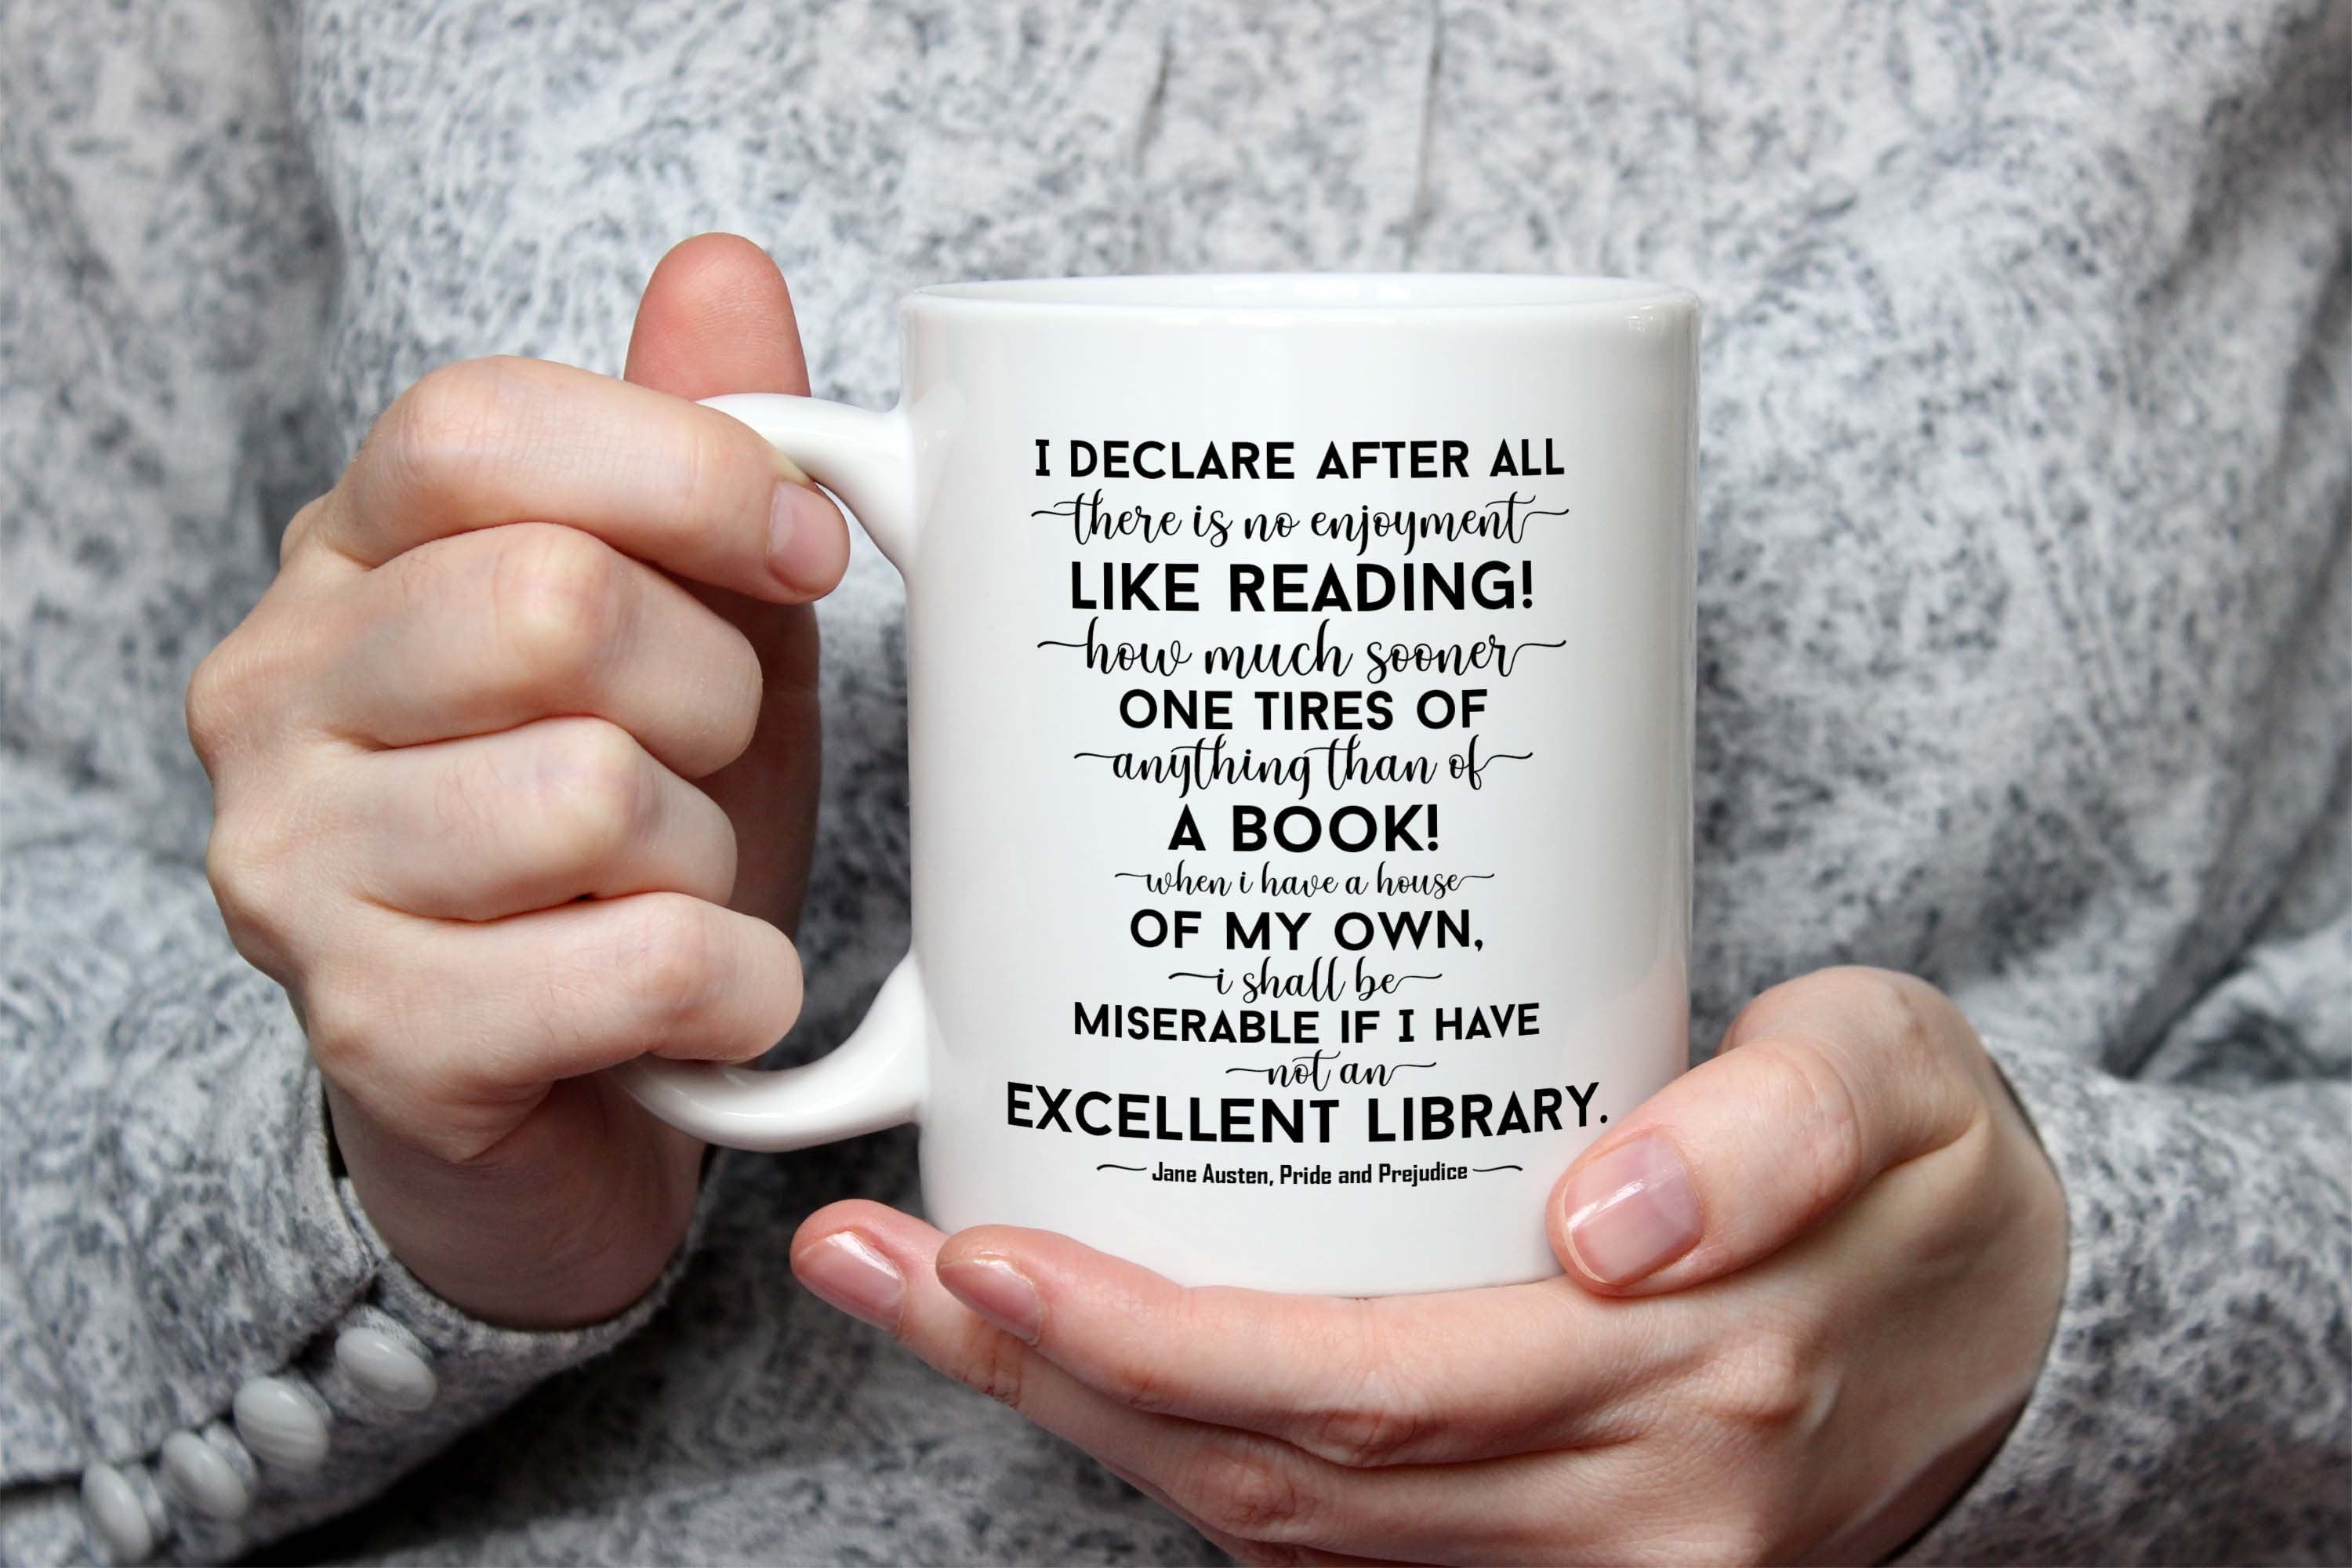 Jane Austen Quote Coffee Mug,  Pride & Prejudice I declare after all there is no enjoyment like reading!